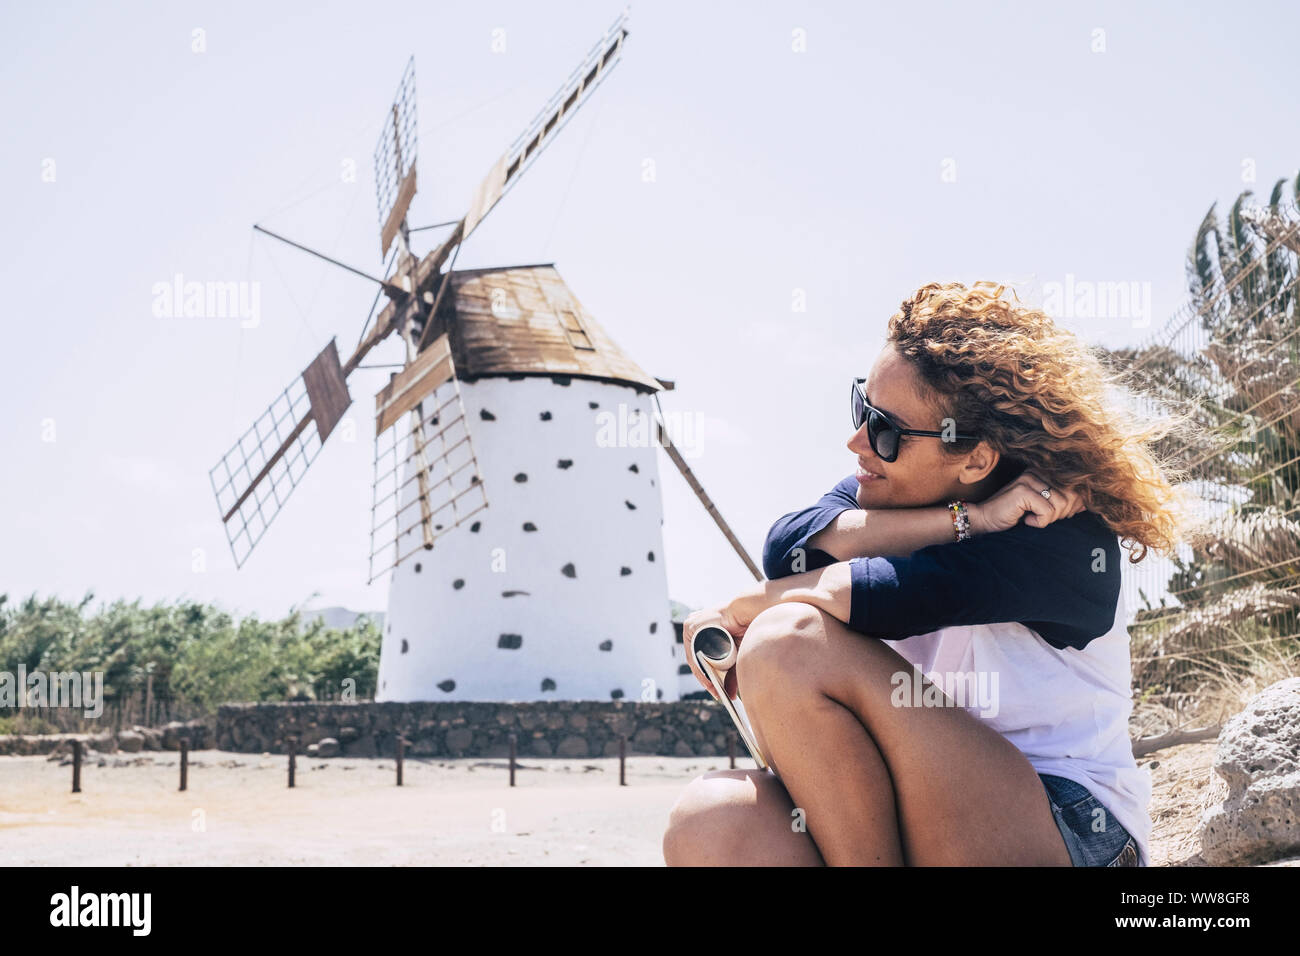 nice curly lady sitting and relaxing with wind in the hair and a wind mill on the background, country side scenic place for peace and relaxation concept for young people that travel in wanderlust and enjoy the world Stock Photo